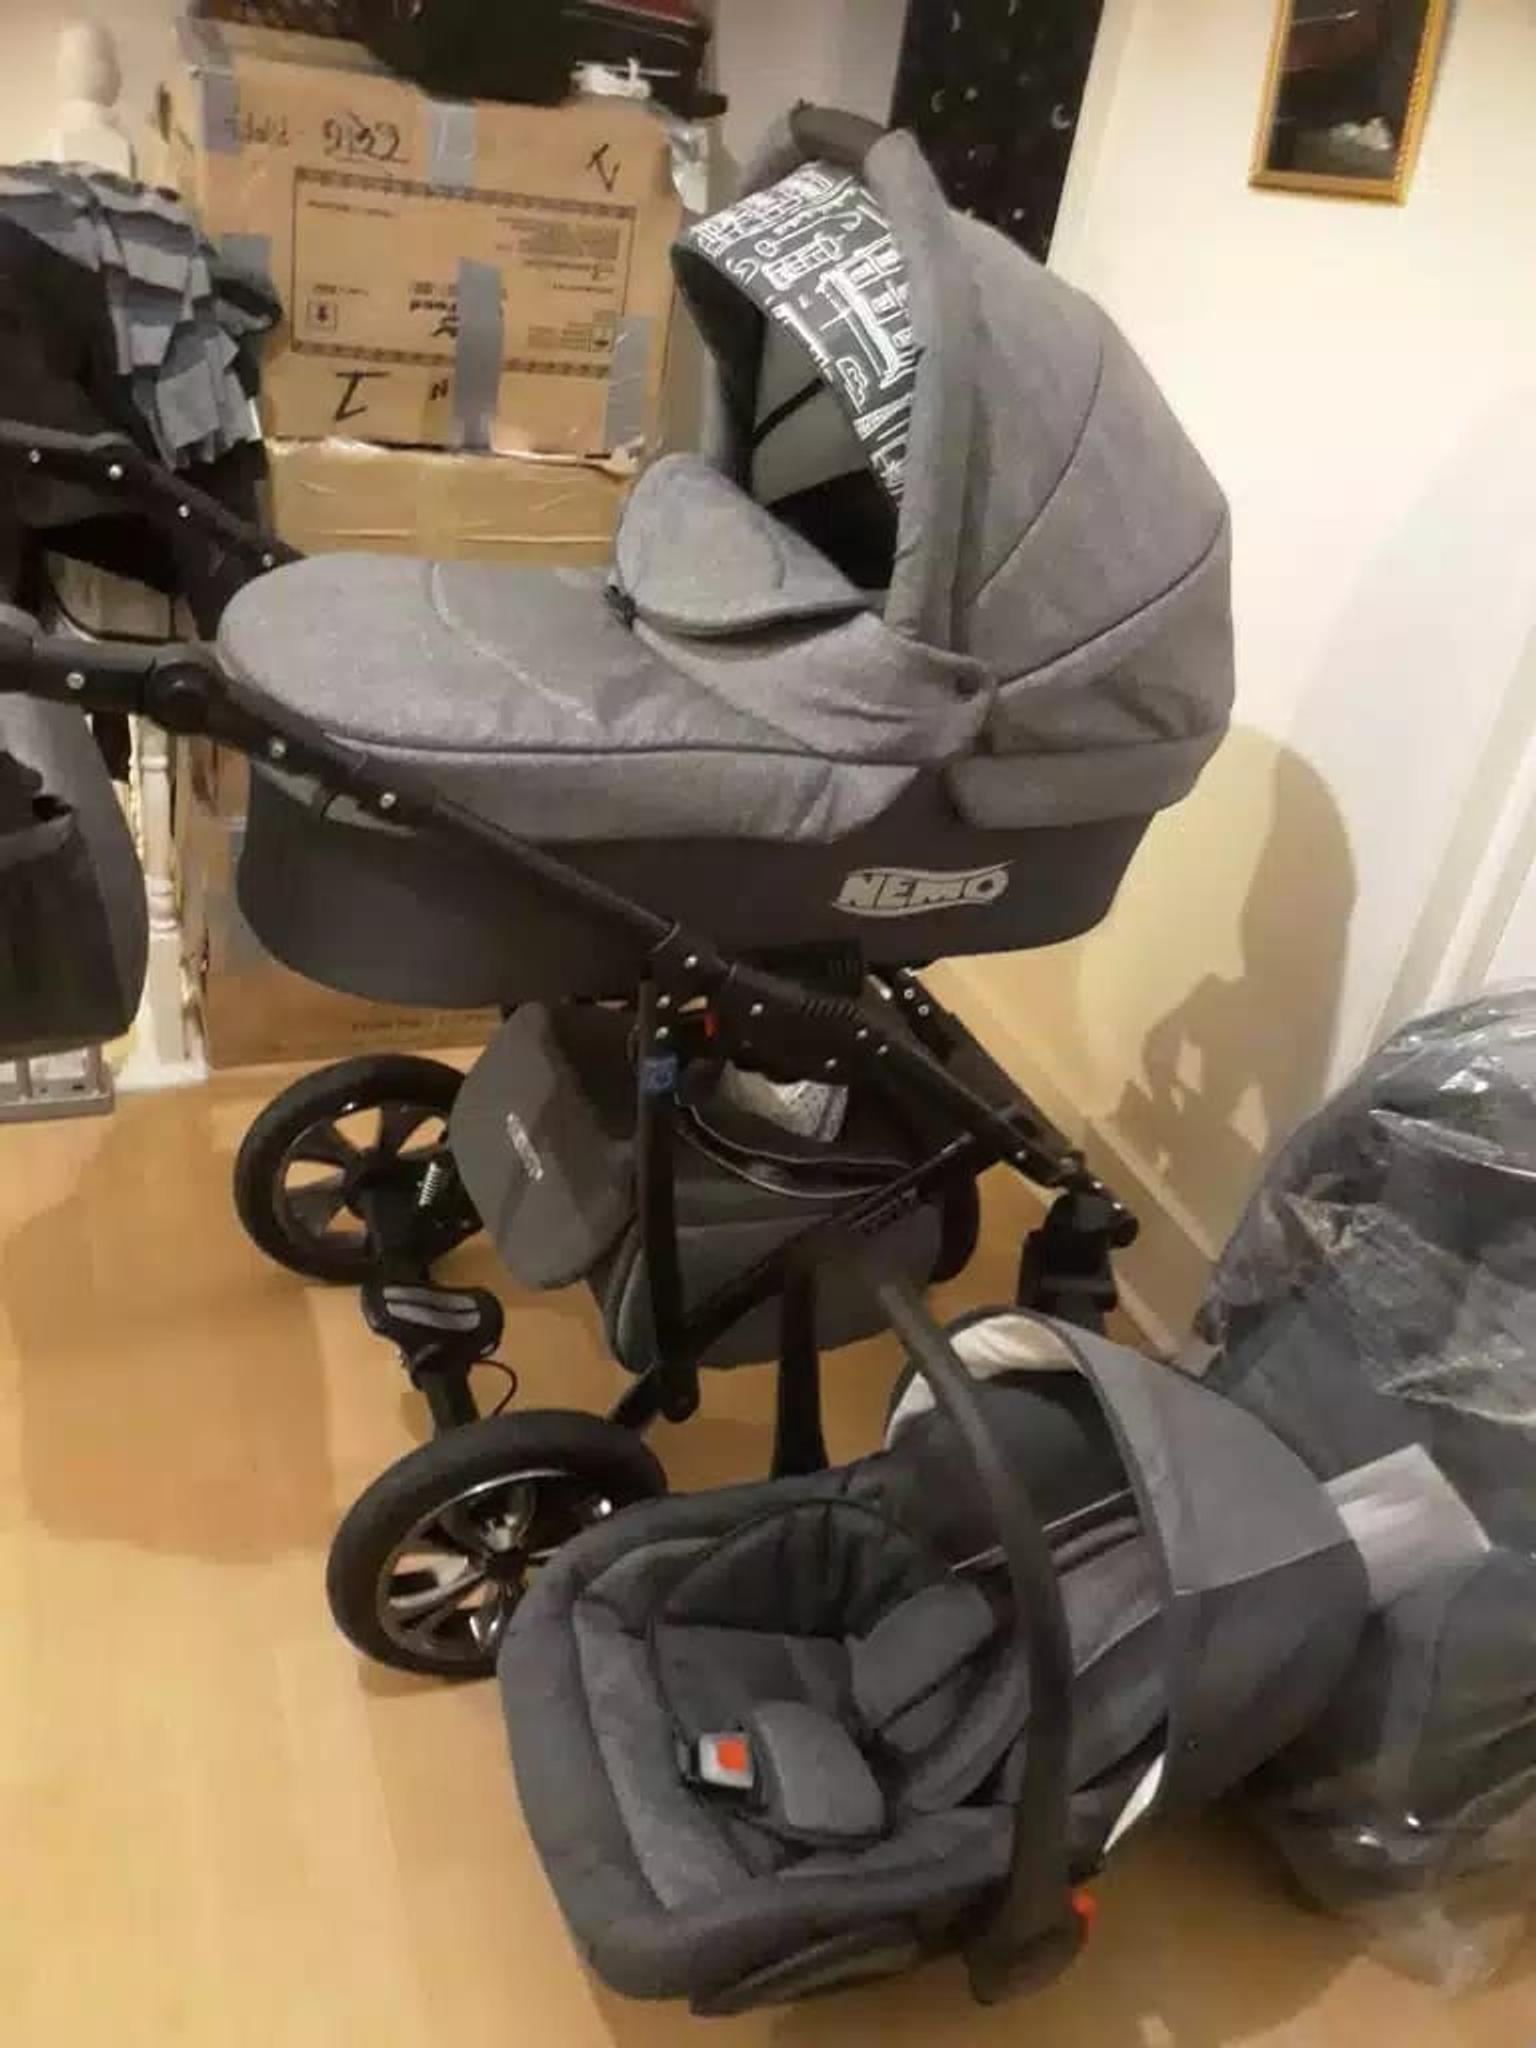 car seat stroller combo baby trend